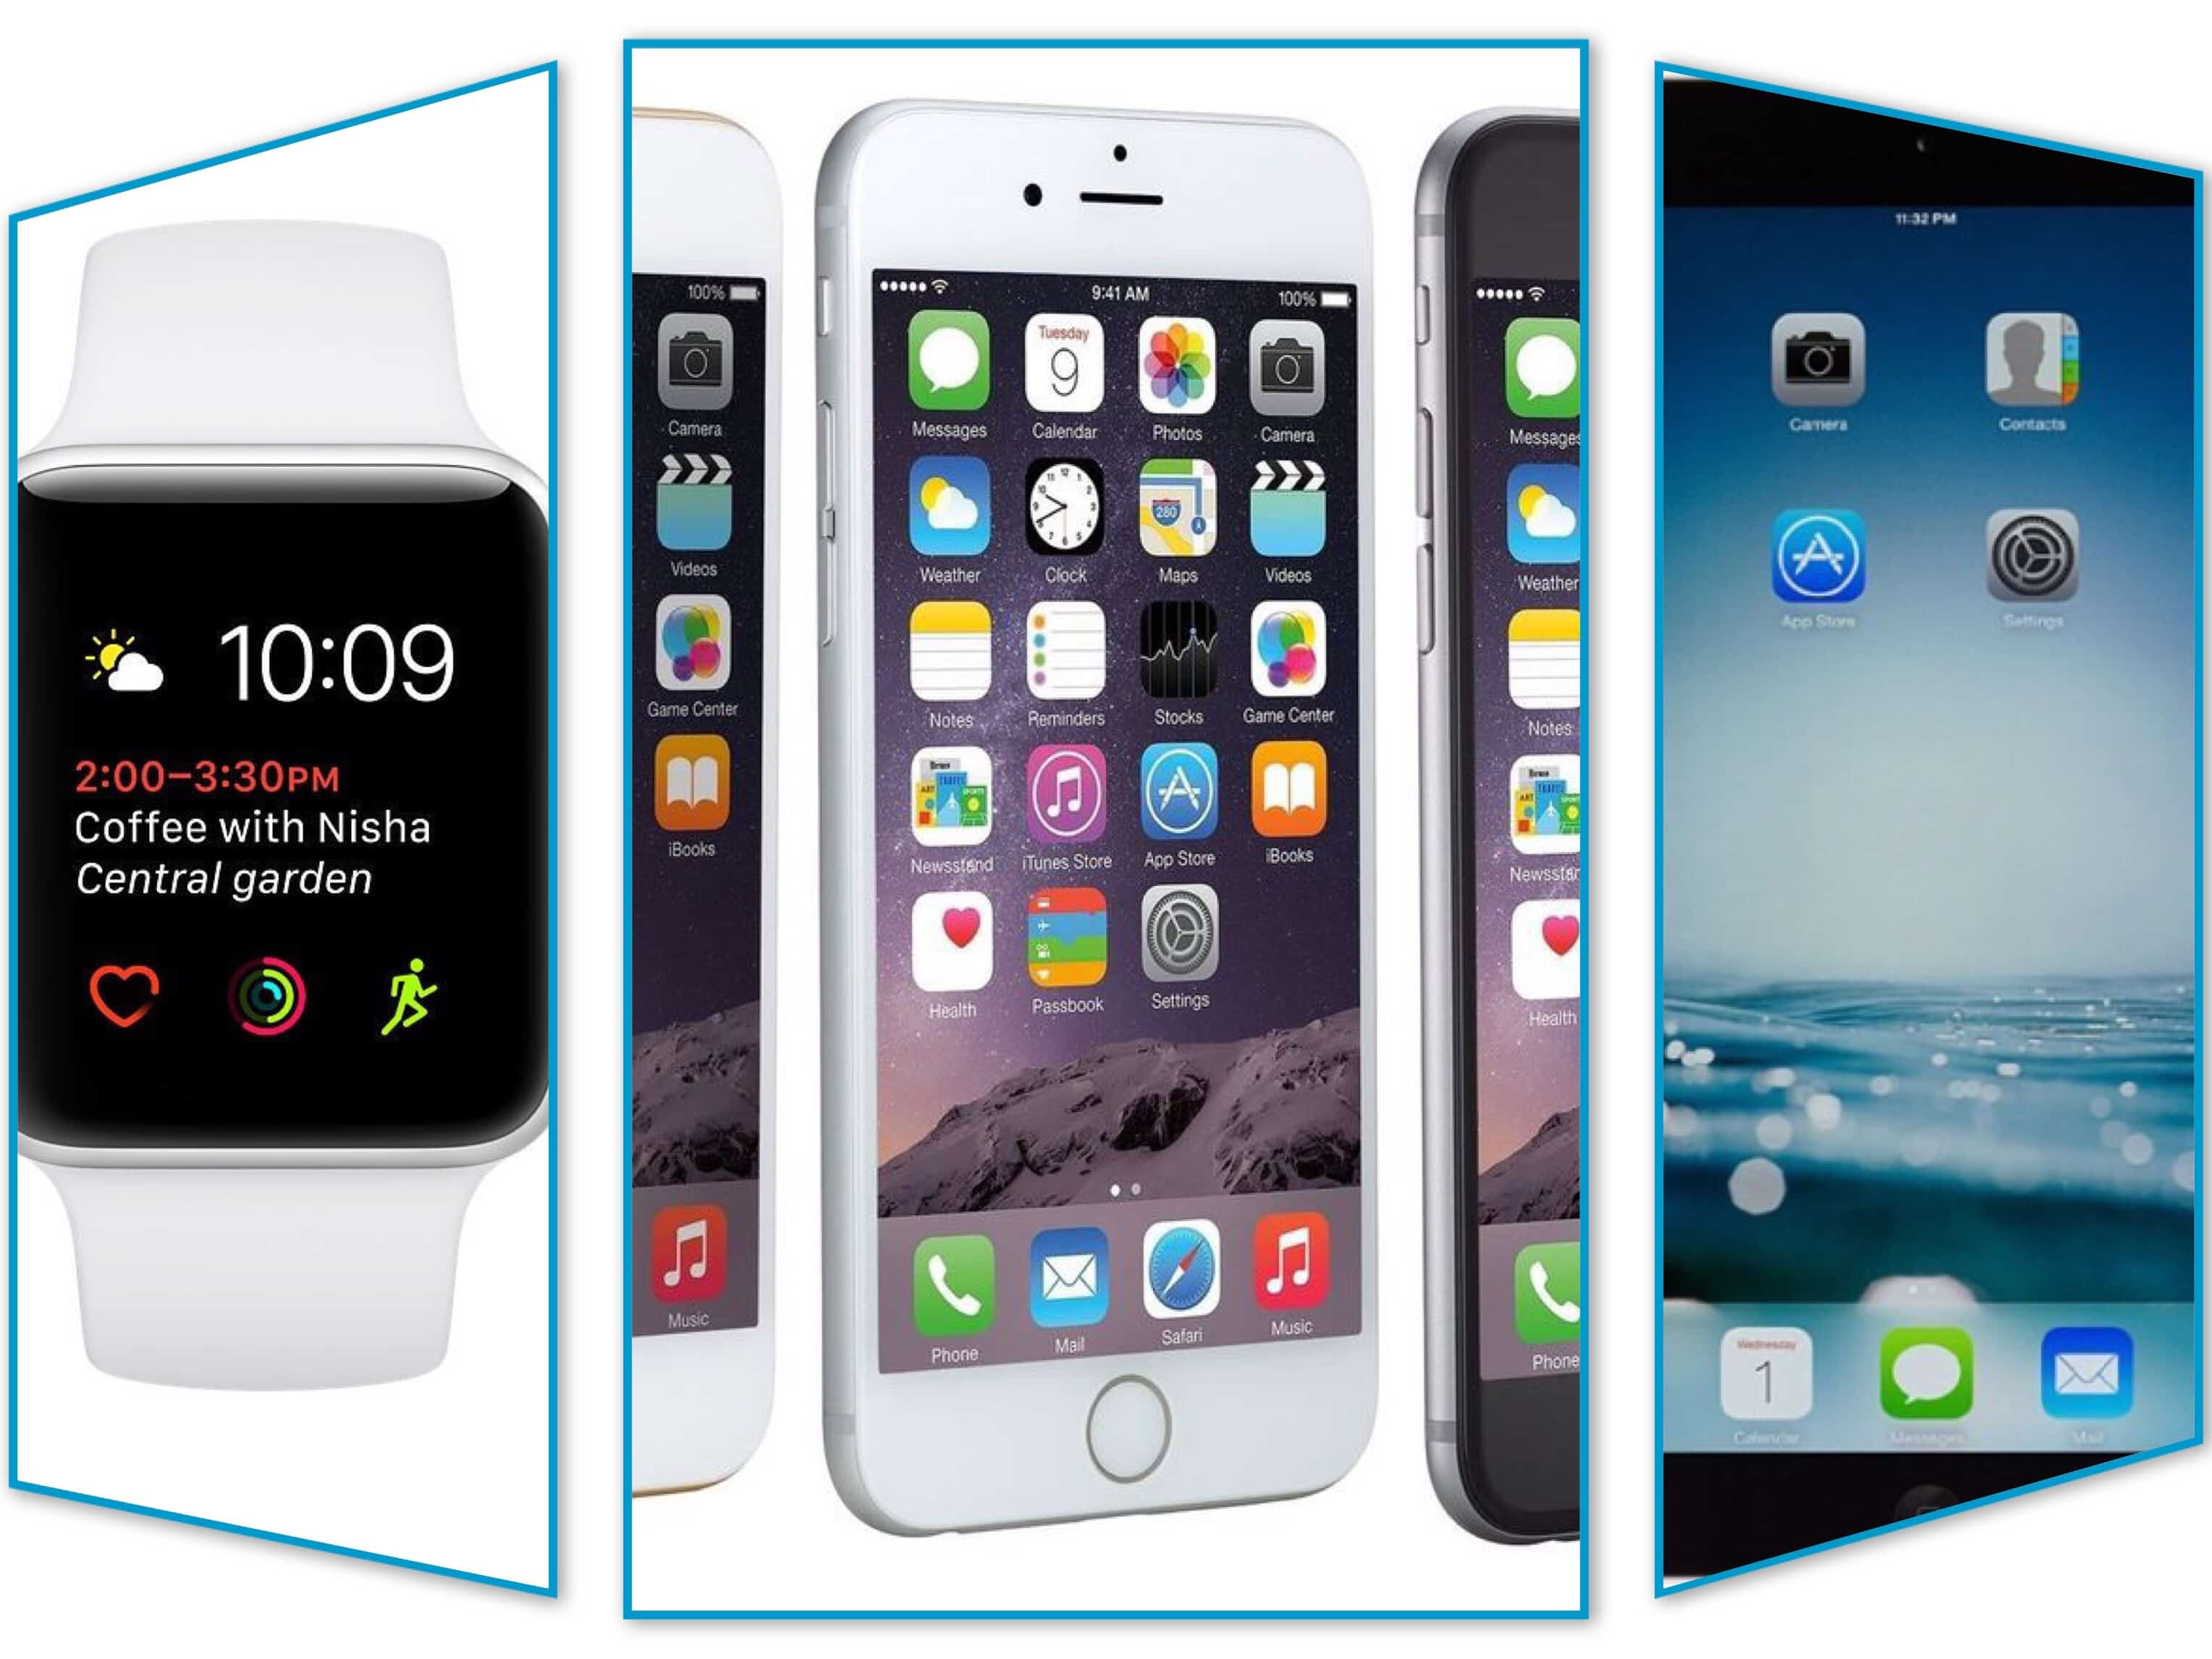 Discontinued models mean big savings on Apple Watch, iPhone and iPad.